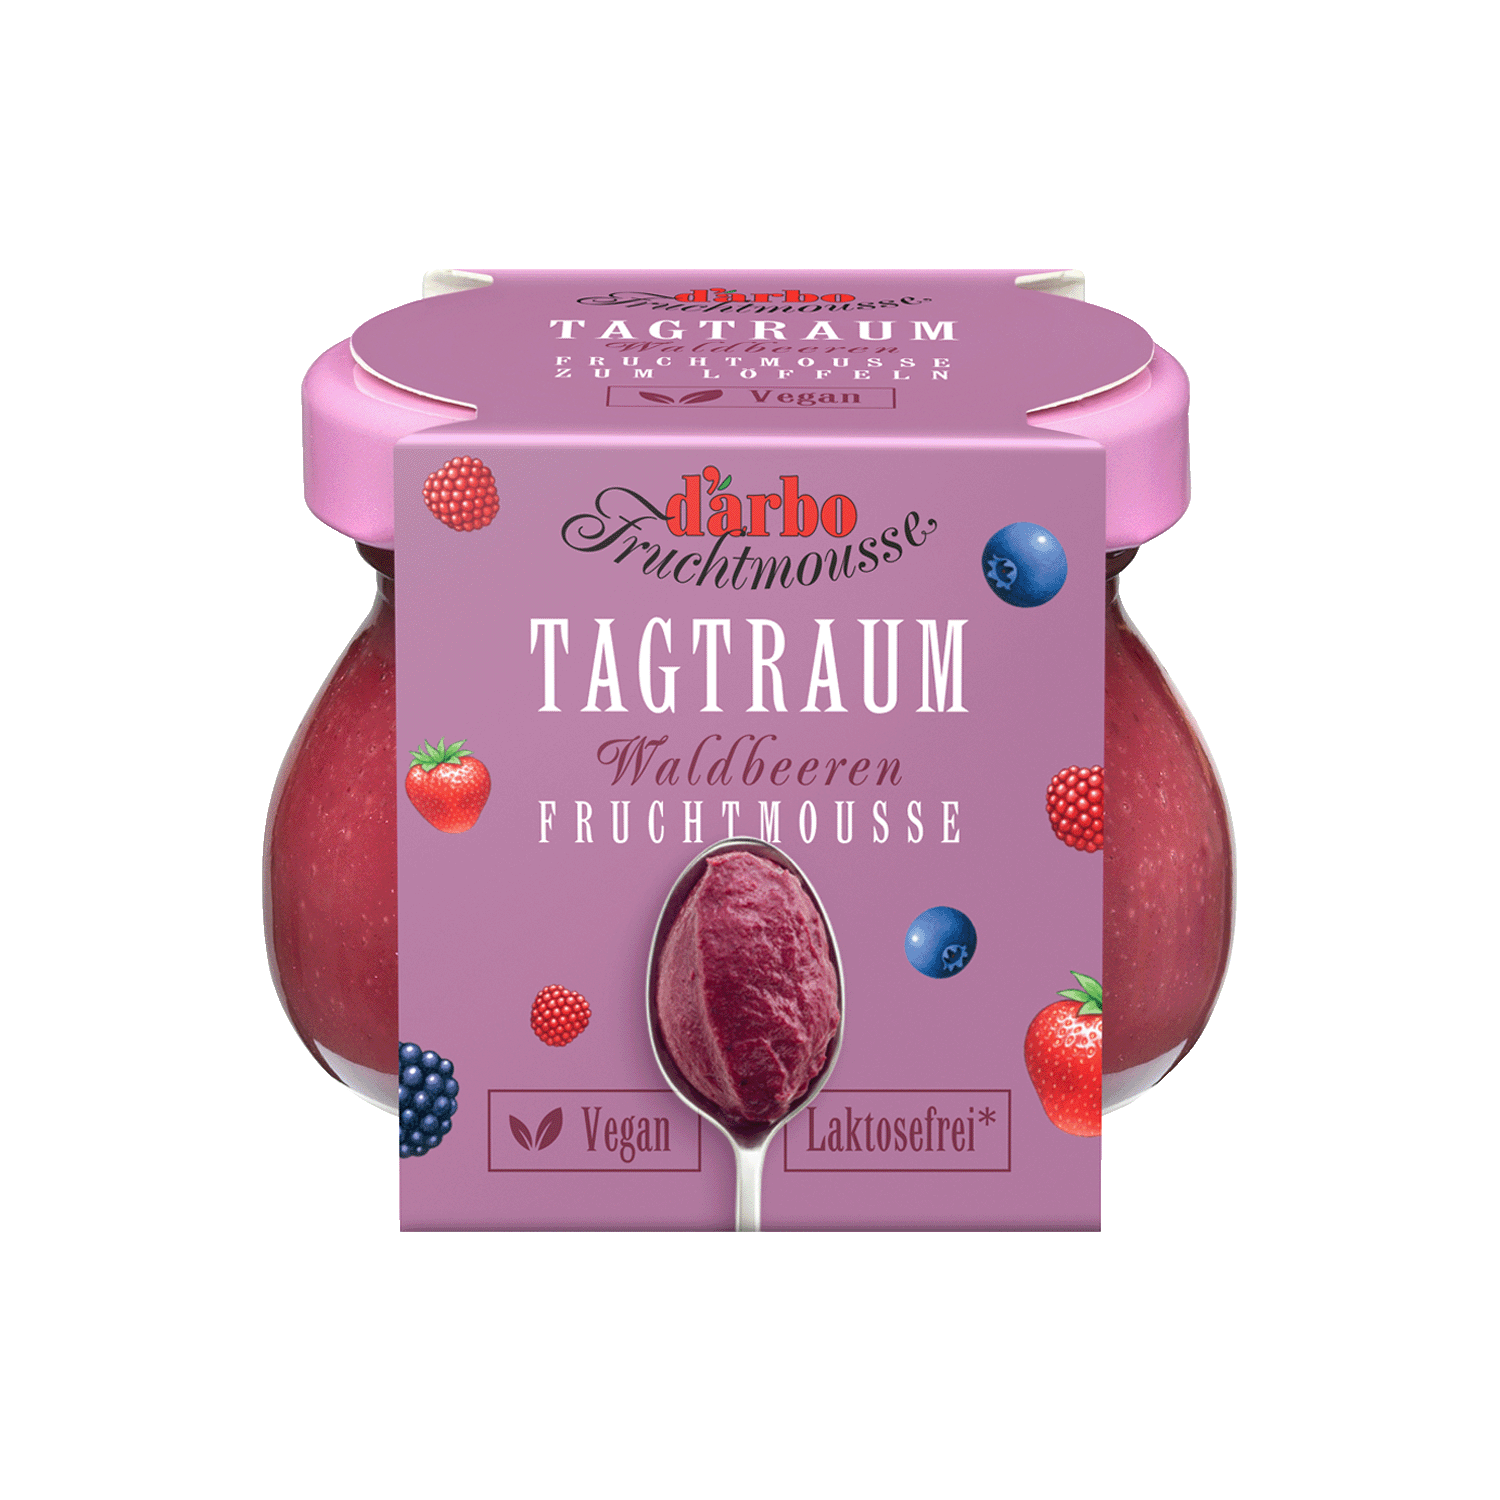 Tagtraum Fruchtmousse Waldbeere, 90g